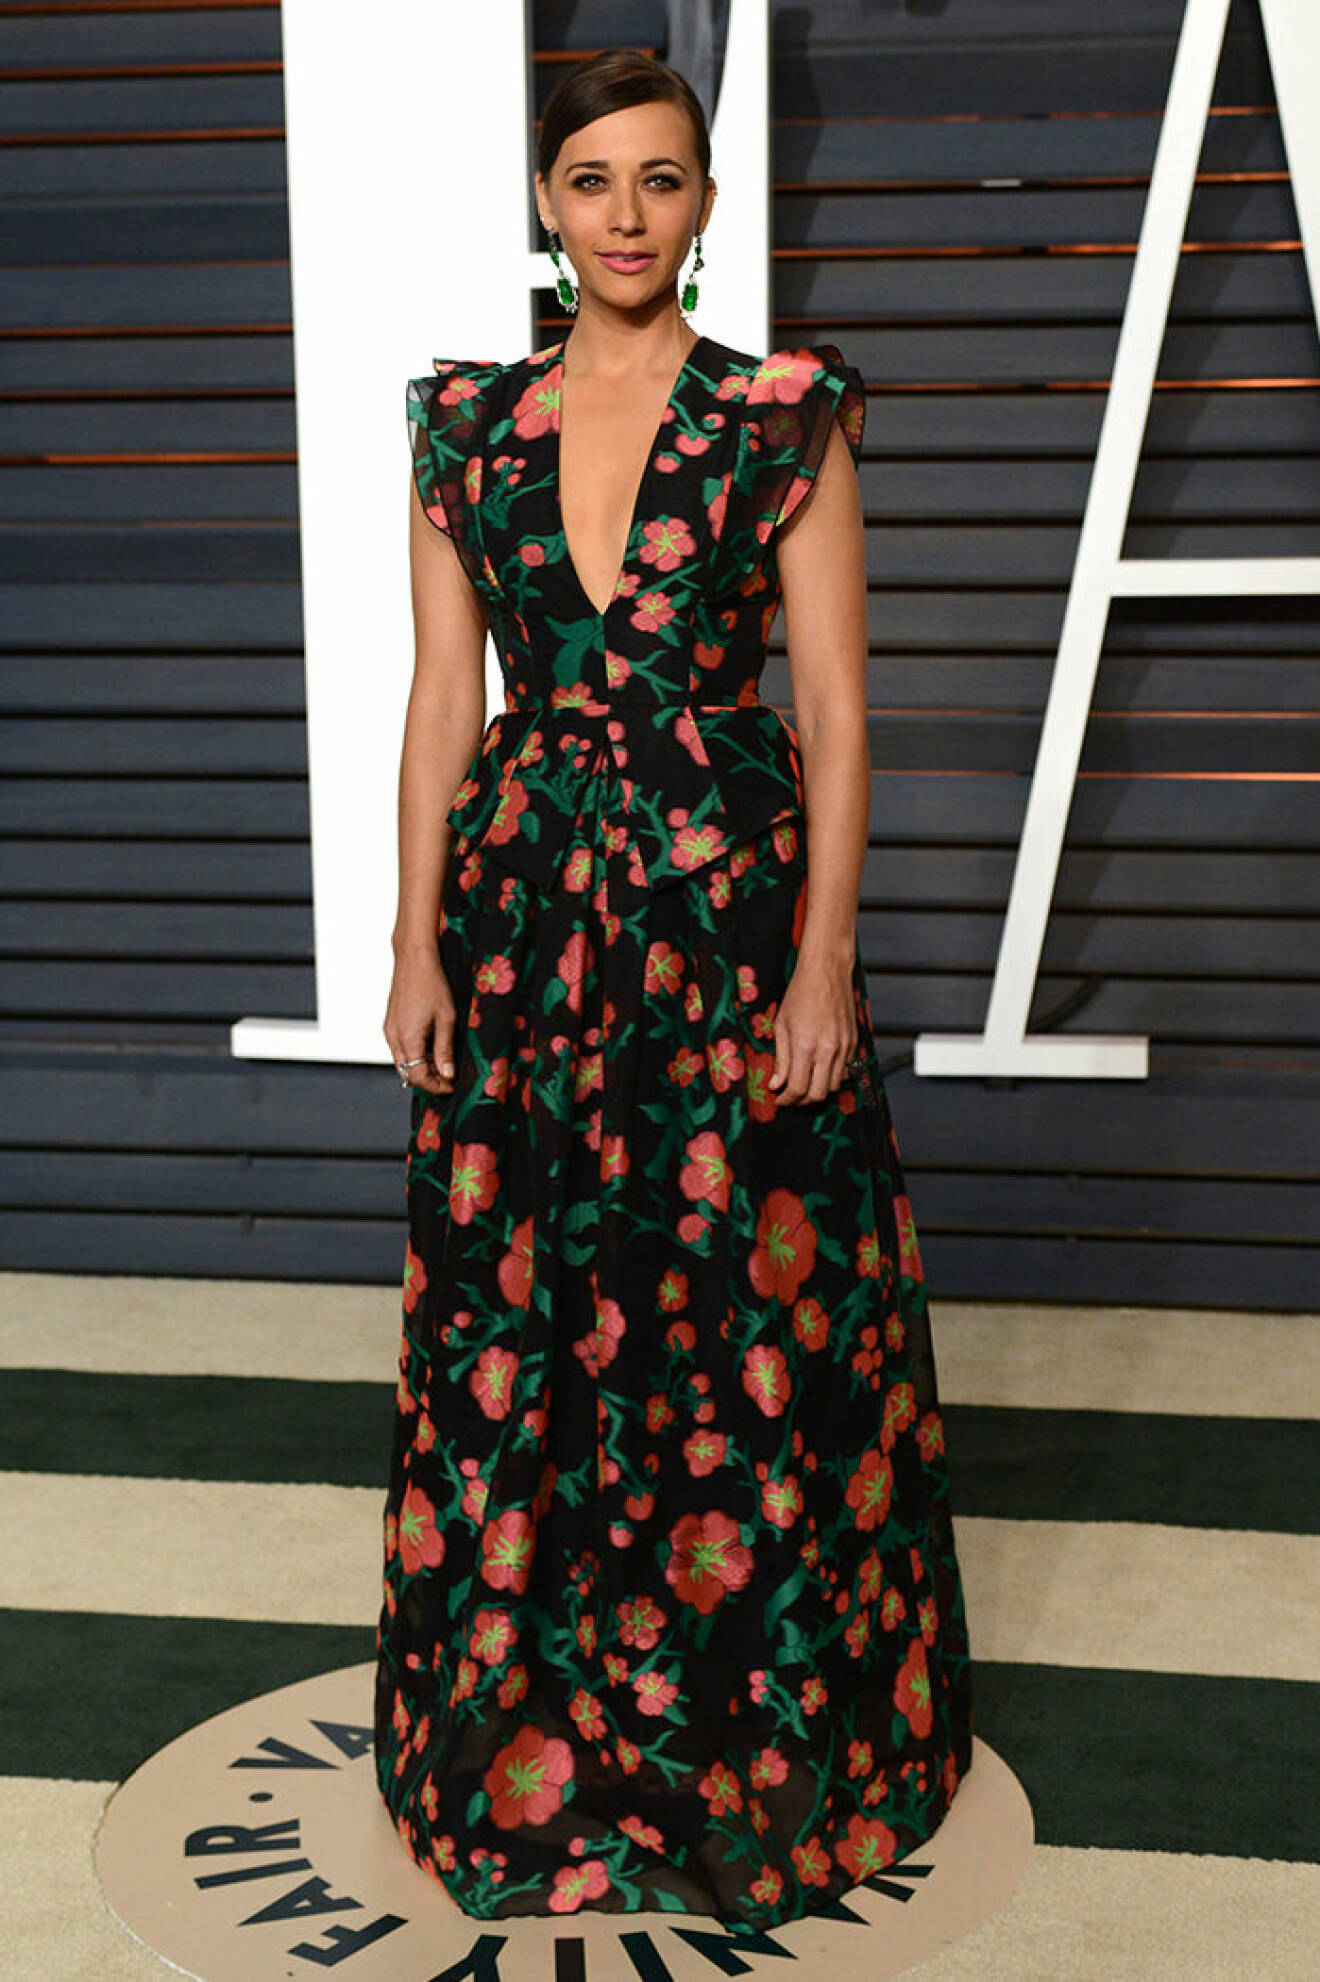 The 2015 Vanity Fair Oscar Viewing Party